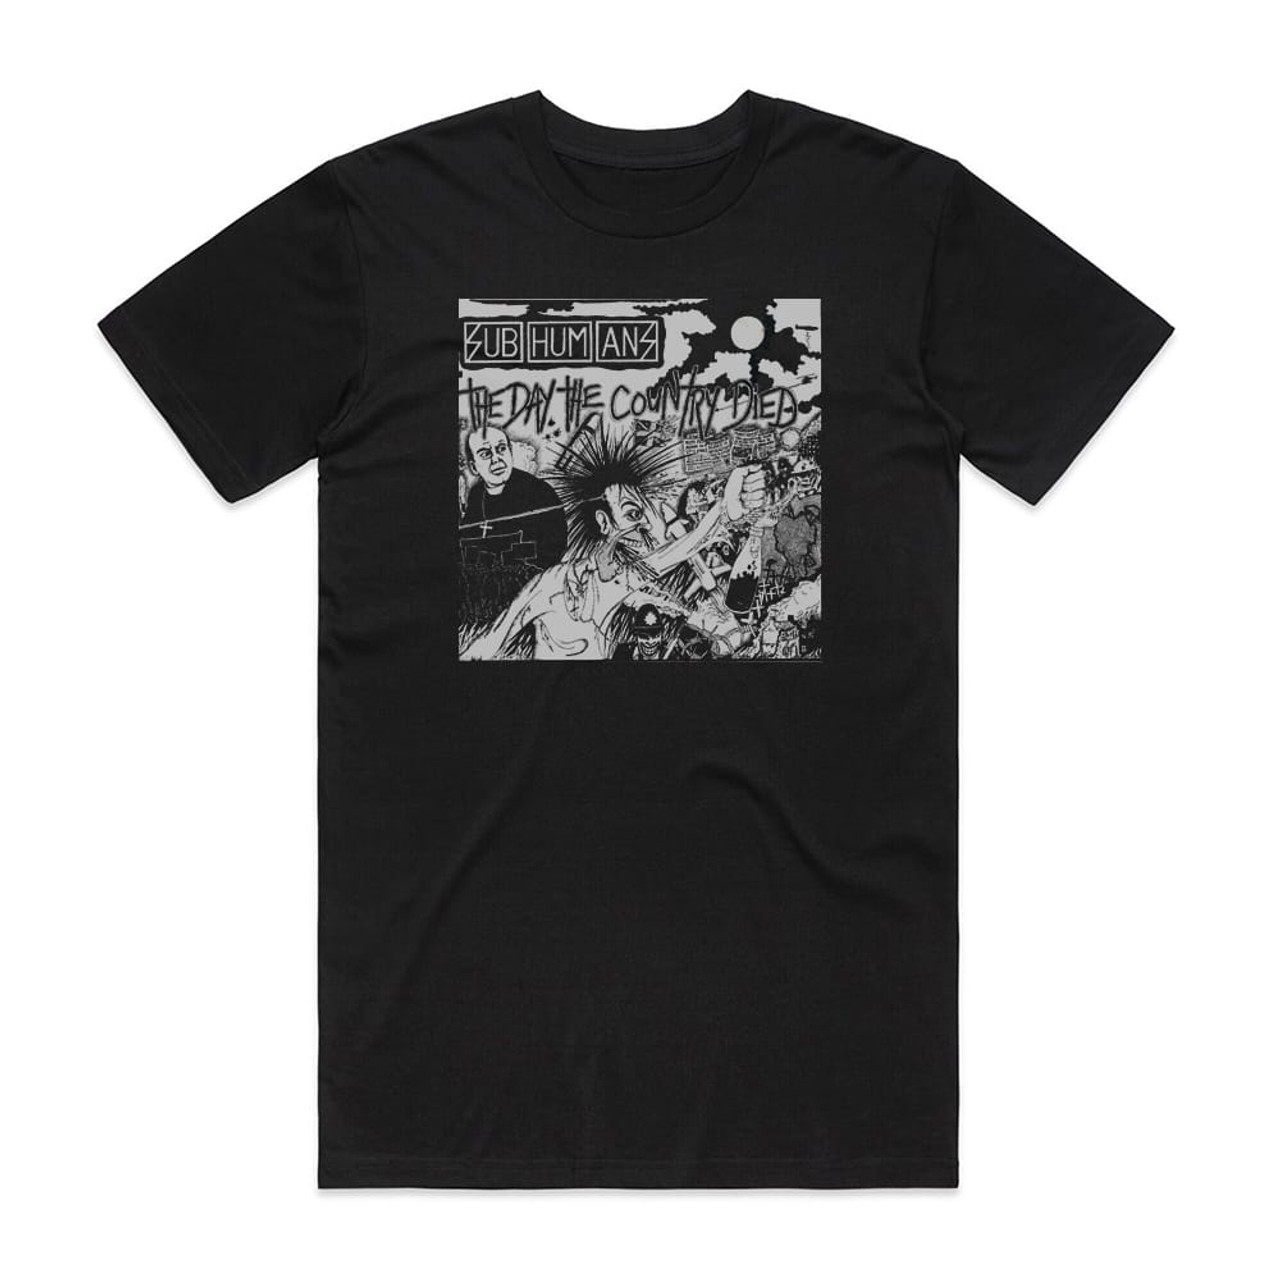 Subhumans The Day The Country Died Album Cover T-Shirt Black